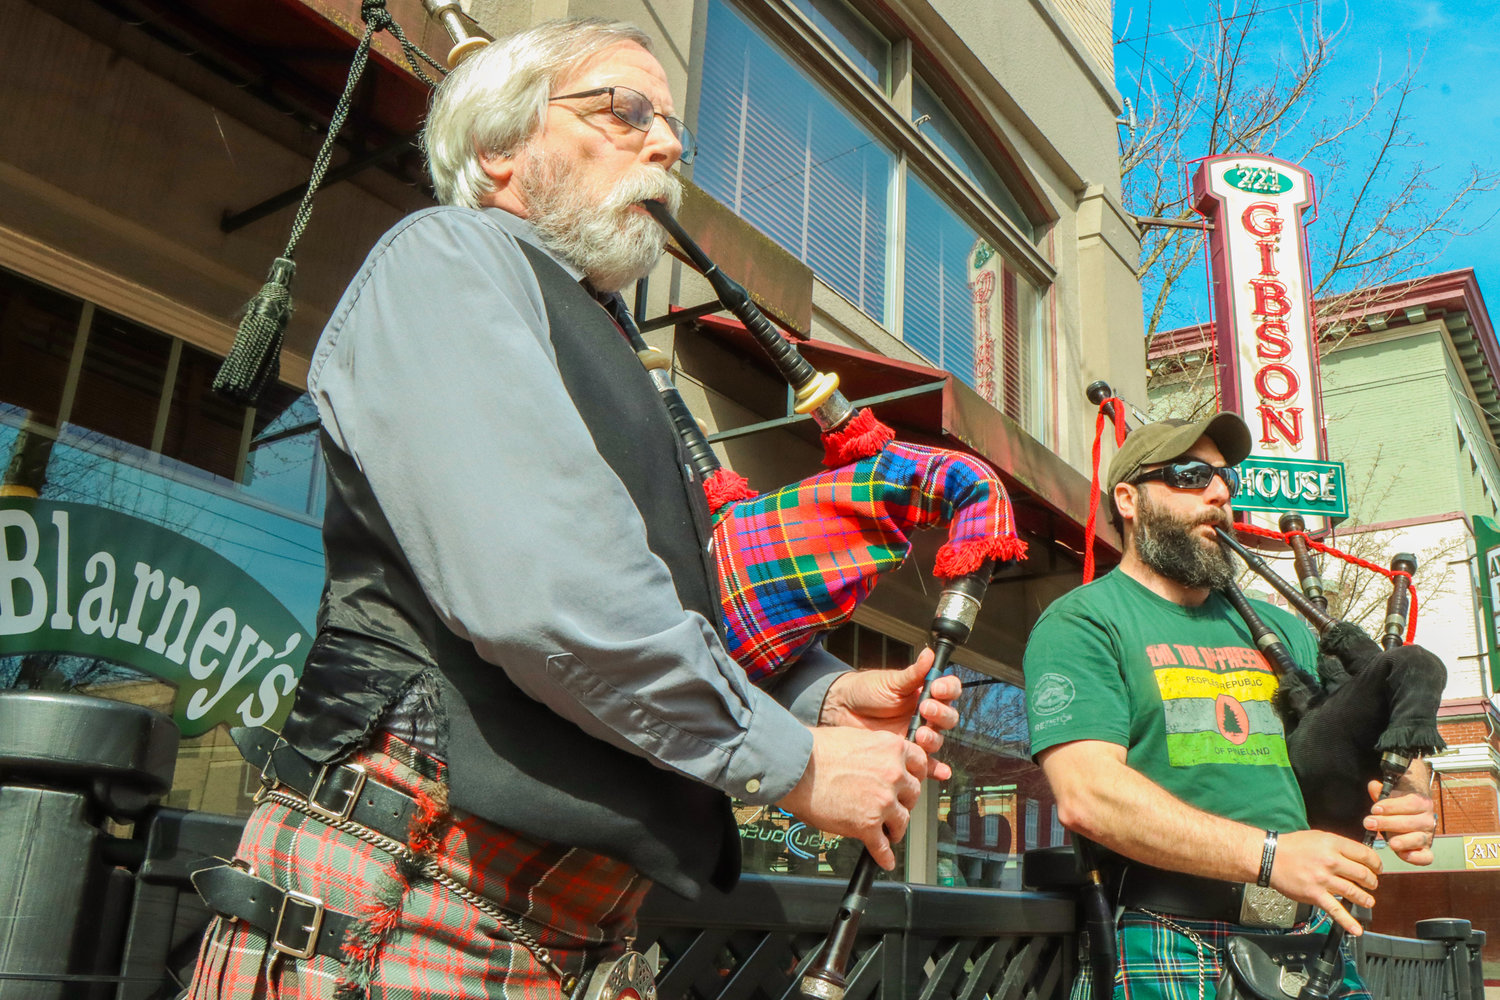 Colin Gemmell and Aaron Amick play bagpipes outside of O'Blarney's Irish Pub on St. Patrick's Day in Centralia.